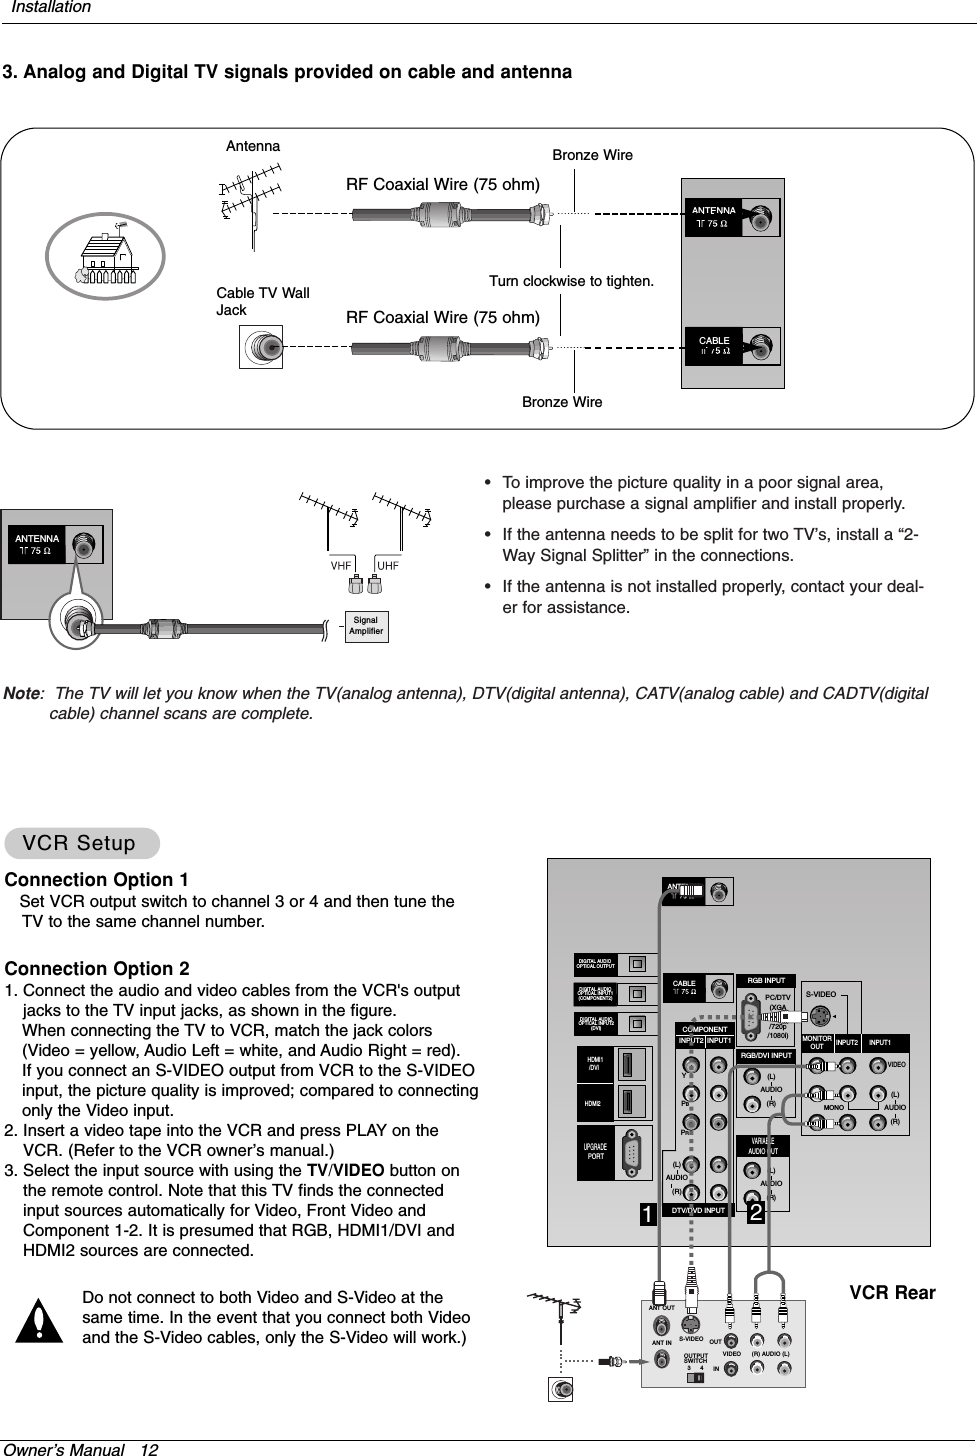 Owner’s Manual   12Note:  The TV will let you know when the TV(analog antenna), DTV(digital antenna), CATV(analog cable) and CADTV(digitalcable) channel scans are complete.•To improve the picture quality in a poor signal area,please purchase a signal amplifier and install properly.•If the antenna needs to be split for two TV’s, install a “2-Way Signal Splitter” in the connections.•If the antenna is not installed properly, contact your deal-er for assistance.ANTENNASignalAmplifier3. Analog and Digital TV signals provided on cable and antennaAntennaRF Coaxial Wire (75 ohm)Bronze WireTurn clockwise to tighten.Cable TV WallJack RF Coaxial Wire (75 ohm)ANTENNACABLEConnection Option 1Set VCR output switch to channel 3 or 4 and then tune theTV to the same channel number.Connection Option 21. Connect the audio and video cables from the VCR&apos;s outputjacks to the TV input jacks, as shown in the figure. When connecting the TV to VCR, match the jack colors(Video = yellow, Audio Left = white, and Audio Right = red).If you connect an S-VIDEO output from VCR to the S-VIDEOinput, the picture quality is improved; compared to connectingonly the Video input.2. Insert a video tape into the VCR and press PLAY on theVCR. (Refer to the VCR owner’s manual.) 3. Select the input source with using the TV/VIDEO button onthe remote control. Note that this TV finds the connectedinput sources automatically for Video, Front Video andComponent 1-2. It is presumed that RGB, HDMI1/DVI andHDMI2 sources are connected.Do not connect to both Video and S-Video at thesame time. In the event that you connect both Videoand the S-Video cables, only the S-Video will work.)VCR SetupVCR SetupPC/DTV(XGA/480p/720p/1080i)S-VIDEOPR PBYMONORGB INPUTCOMPONENTINPUT2 INPUT1DTV/DVD INPUTRGB/DVI INPUT(L)(R)AUDIO (L)(R)AUDIOVIDEO(L)(R)AUDIO(L)(R)AUDIOMONITOROUT INPUT2 INPUT1DIGITAL AUDIOOPTICAL INPUT1(COMPONENT2)DIGITAL AUDIOOPTICAL INPUT2(DVI)DIGITAL AUDIO OPTICAL OUTPUTANTENNA HDMI1/DVI VARIABLEAUDIO OUT HDMI2UPGRADEPORTCABLES-VIDEO OUTIN(R) AUDIO (L)VIDEO34OUTPUTSWITCHANT OUTANT INVCR Rear12Bronze WireInstallation